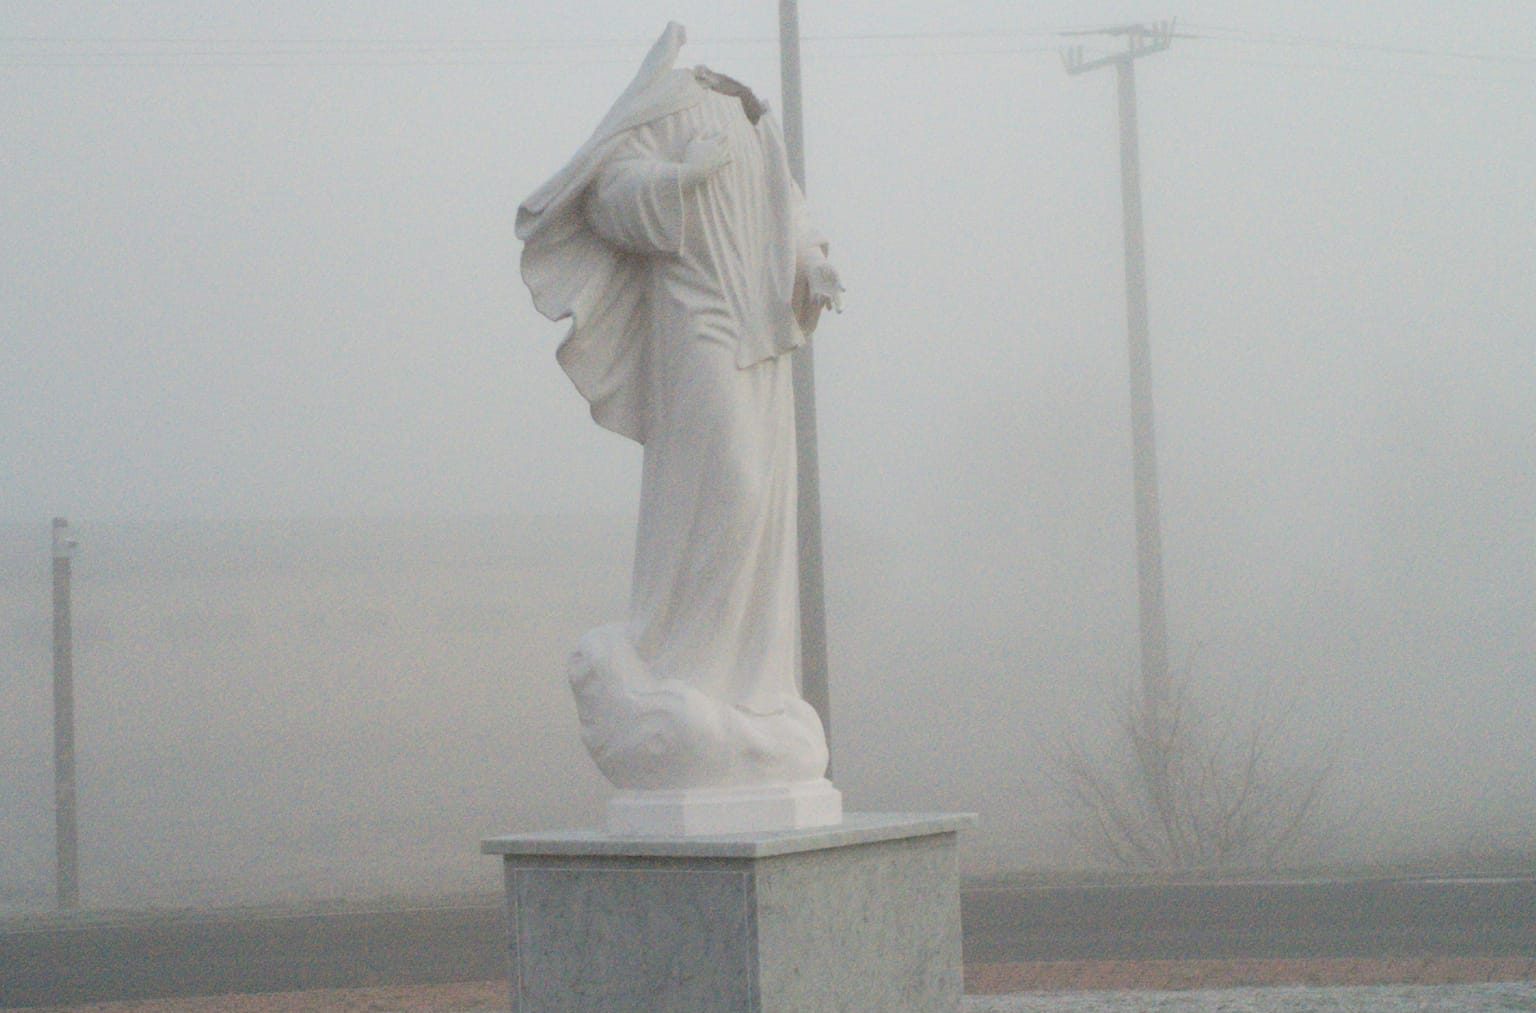 Romanian Man Arrested for Vandalizing Religious Statue in Dunavecse Twice